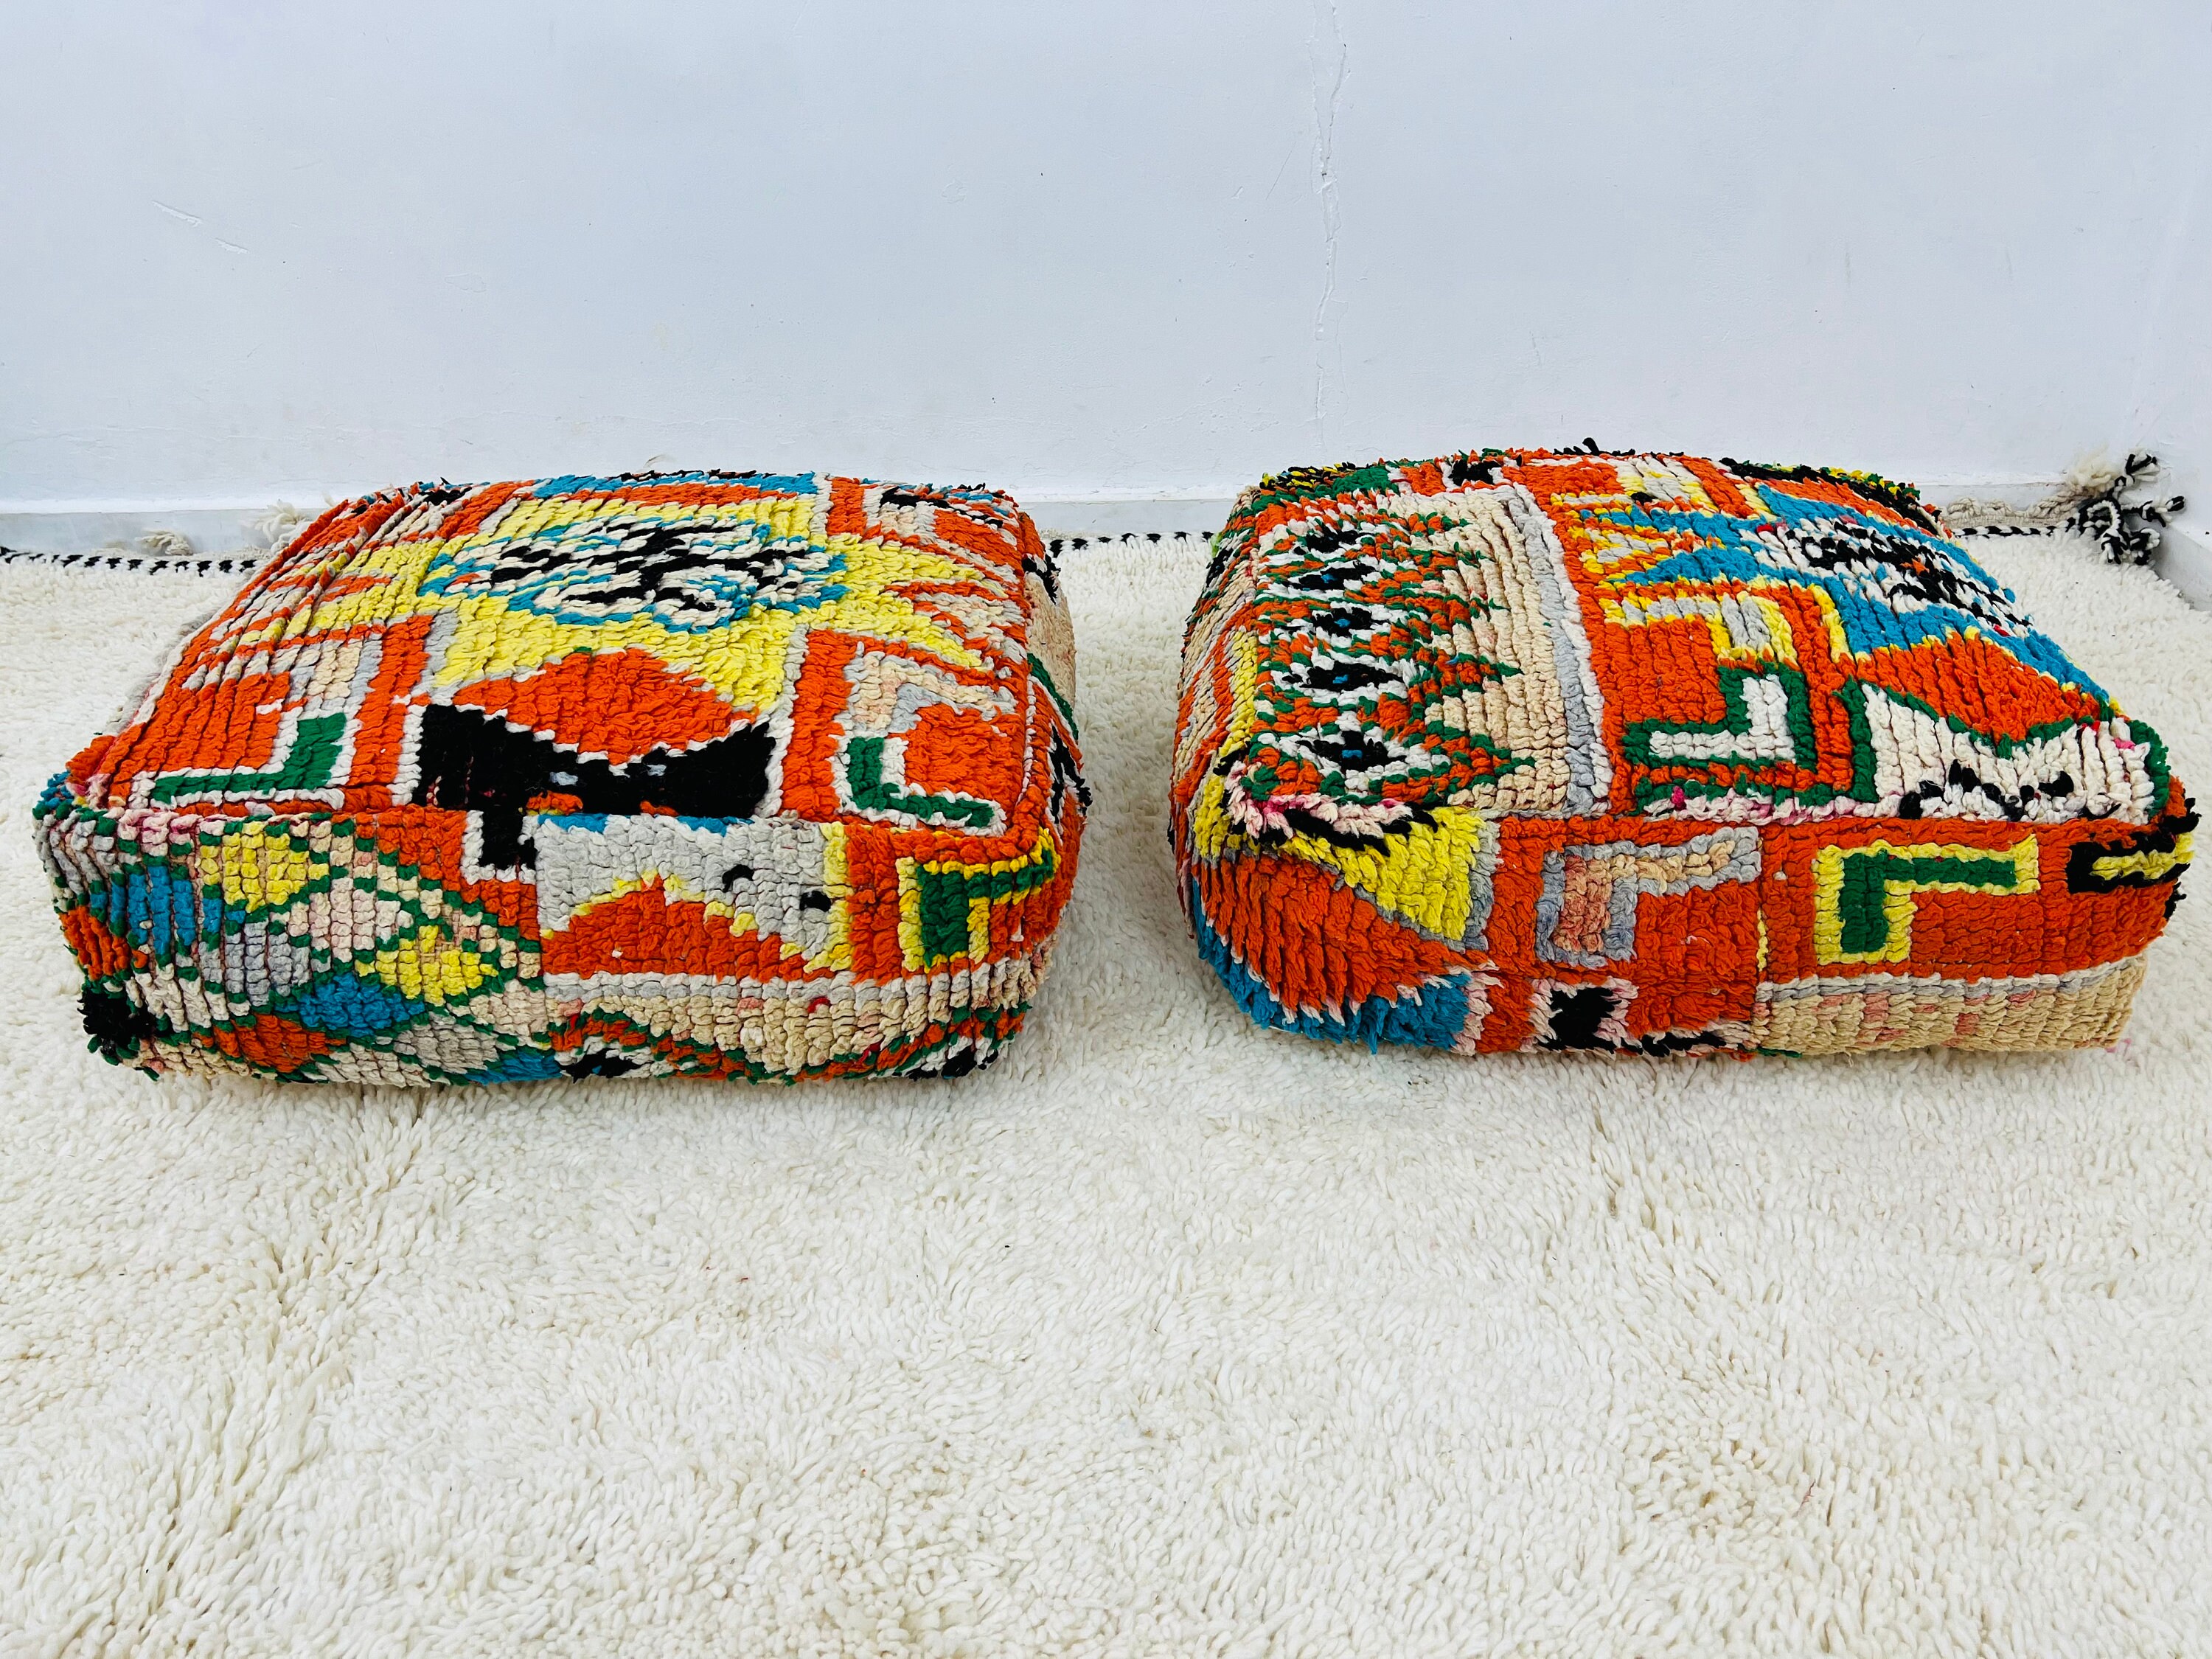 Multicolor Pouffe-Vintag Pouf-Ottoman Footstool Cover-Floor Cushion-24 X 24 8 Inches